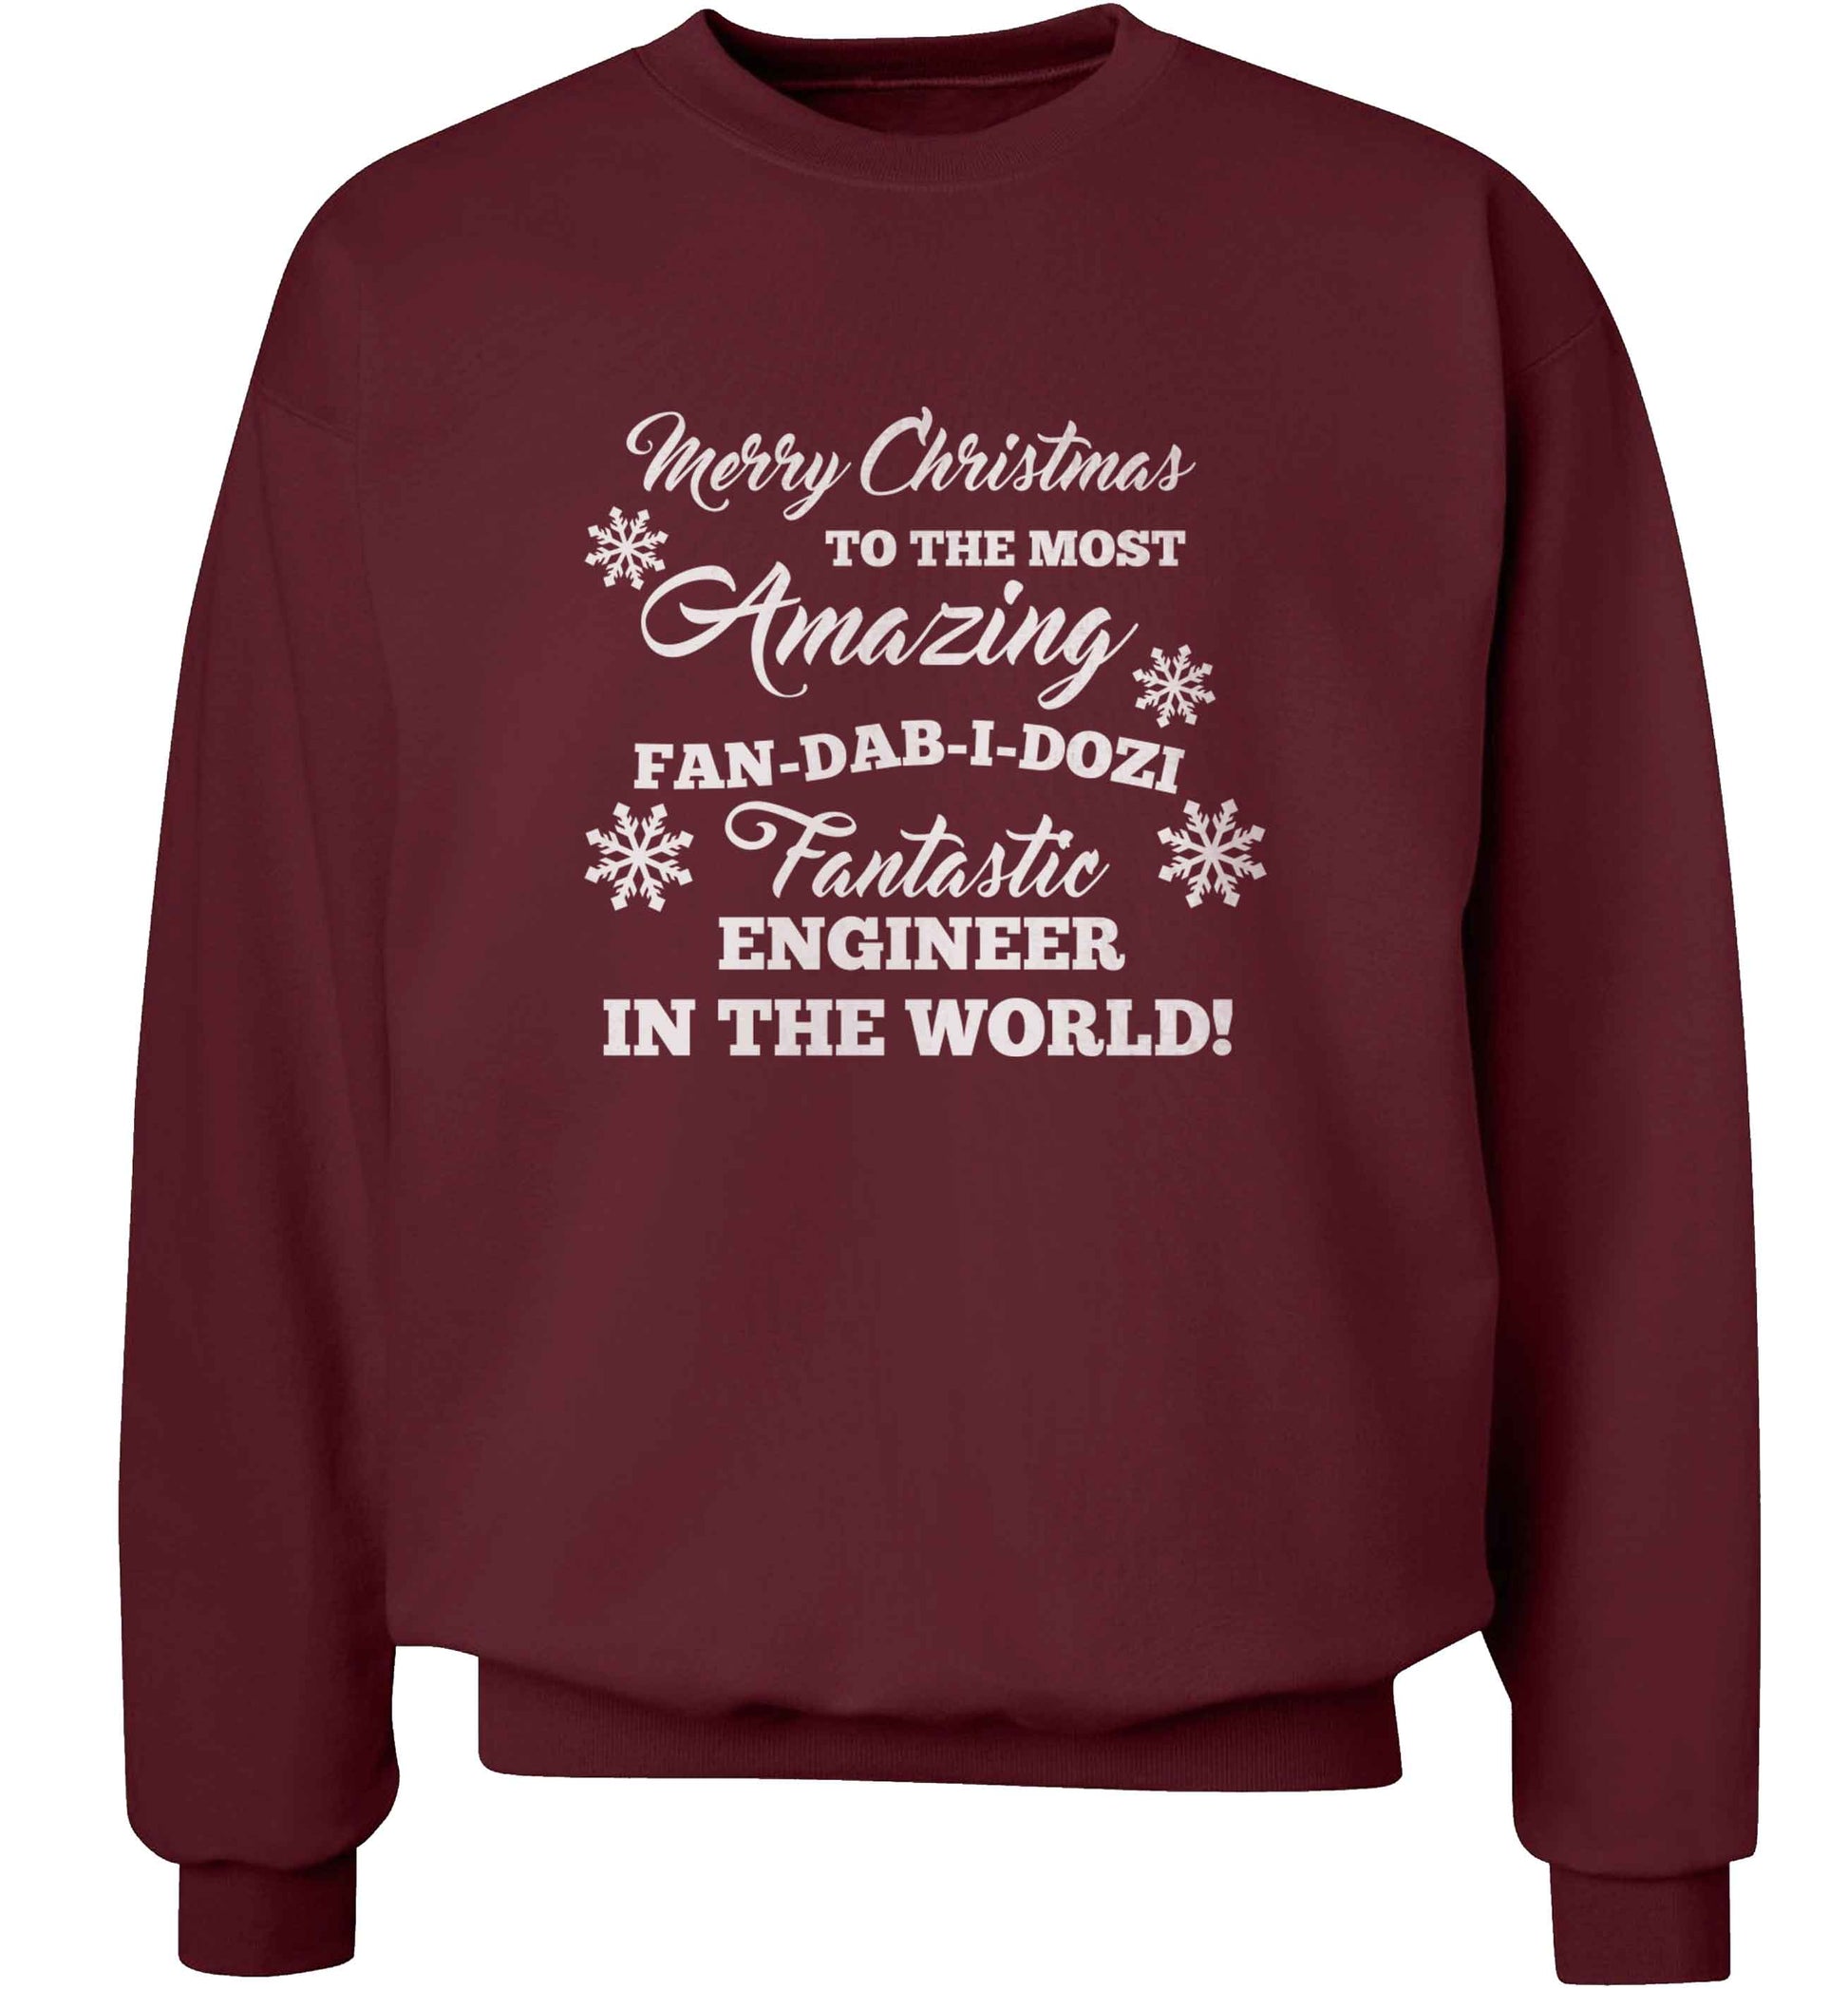 Merry Christmas to the most amazing engineer in the world! adult's unisex maroon sweater 2XL